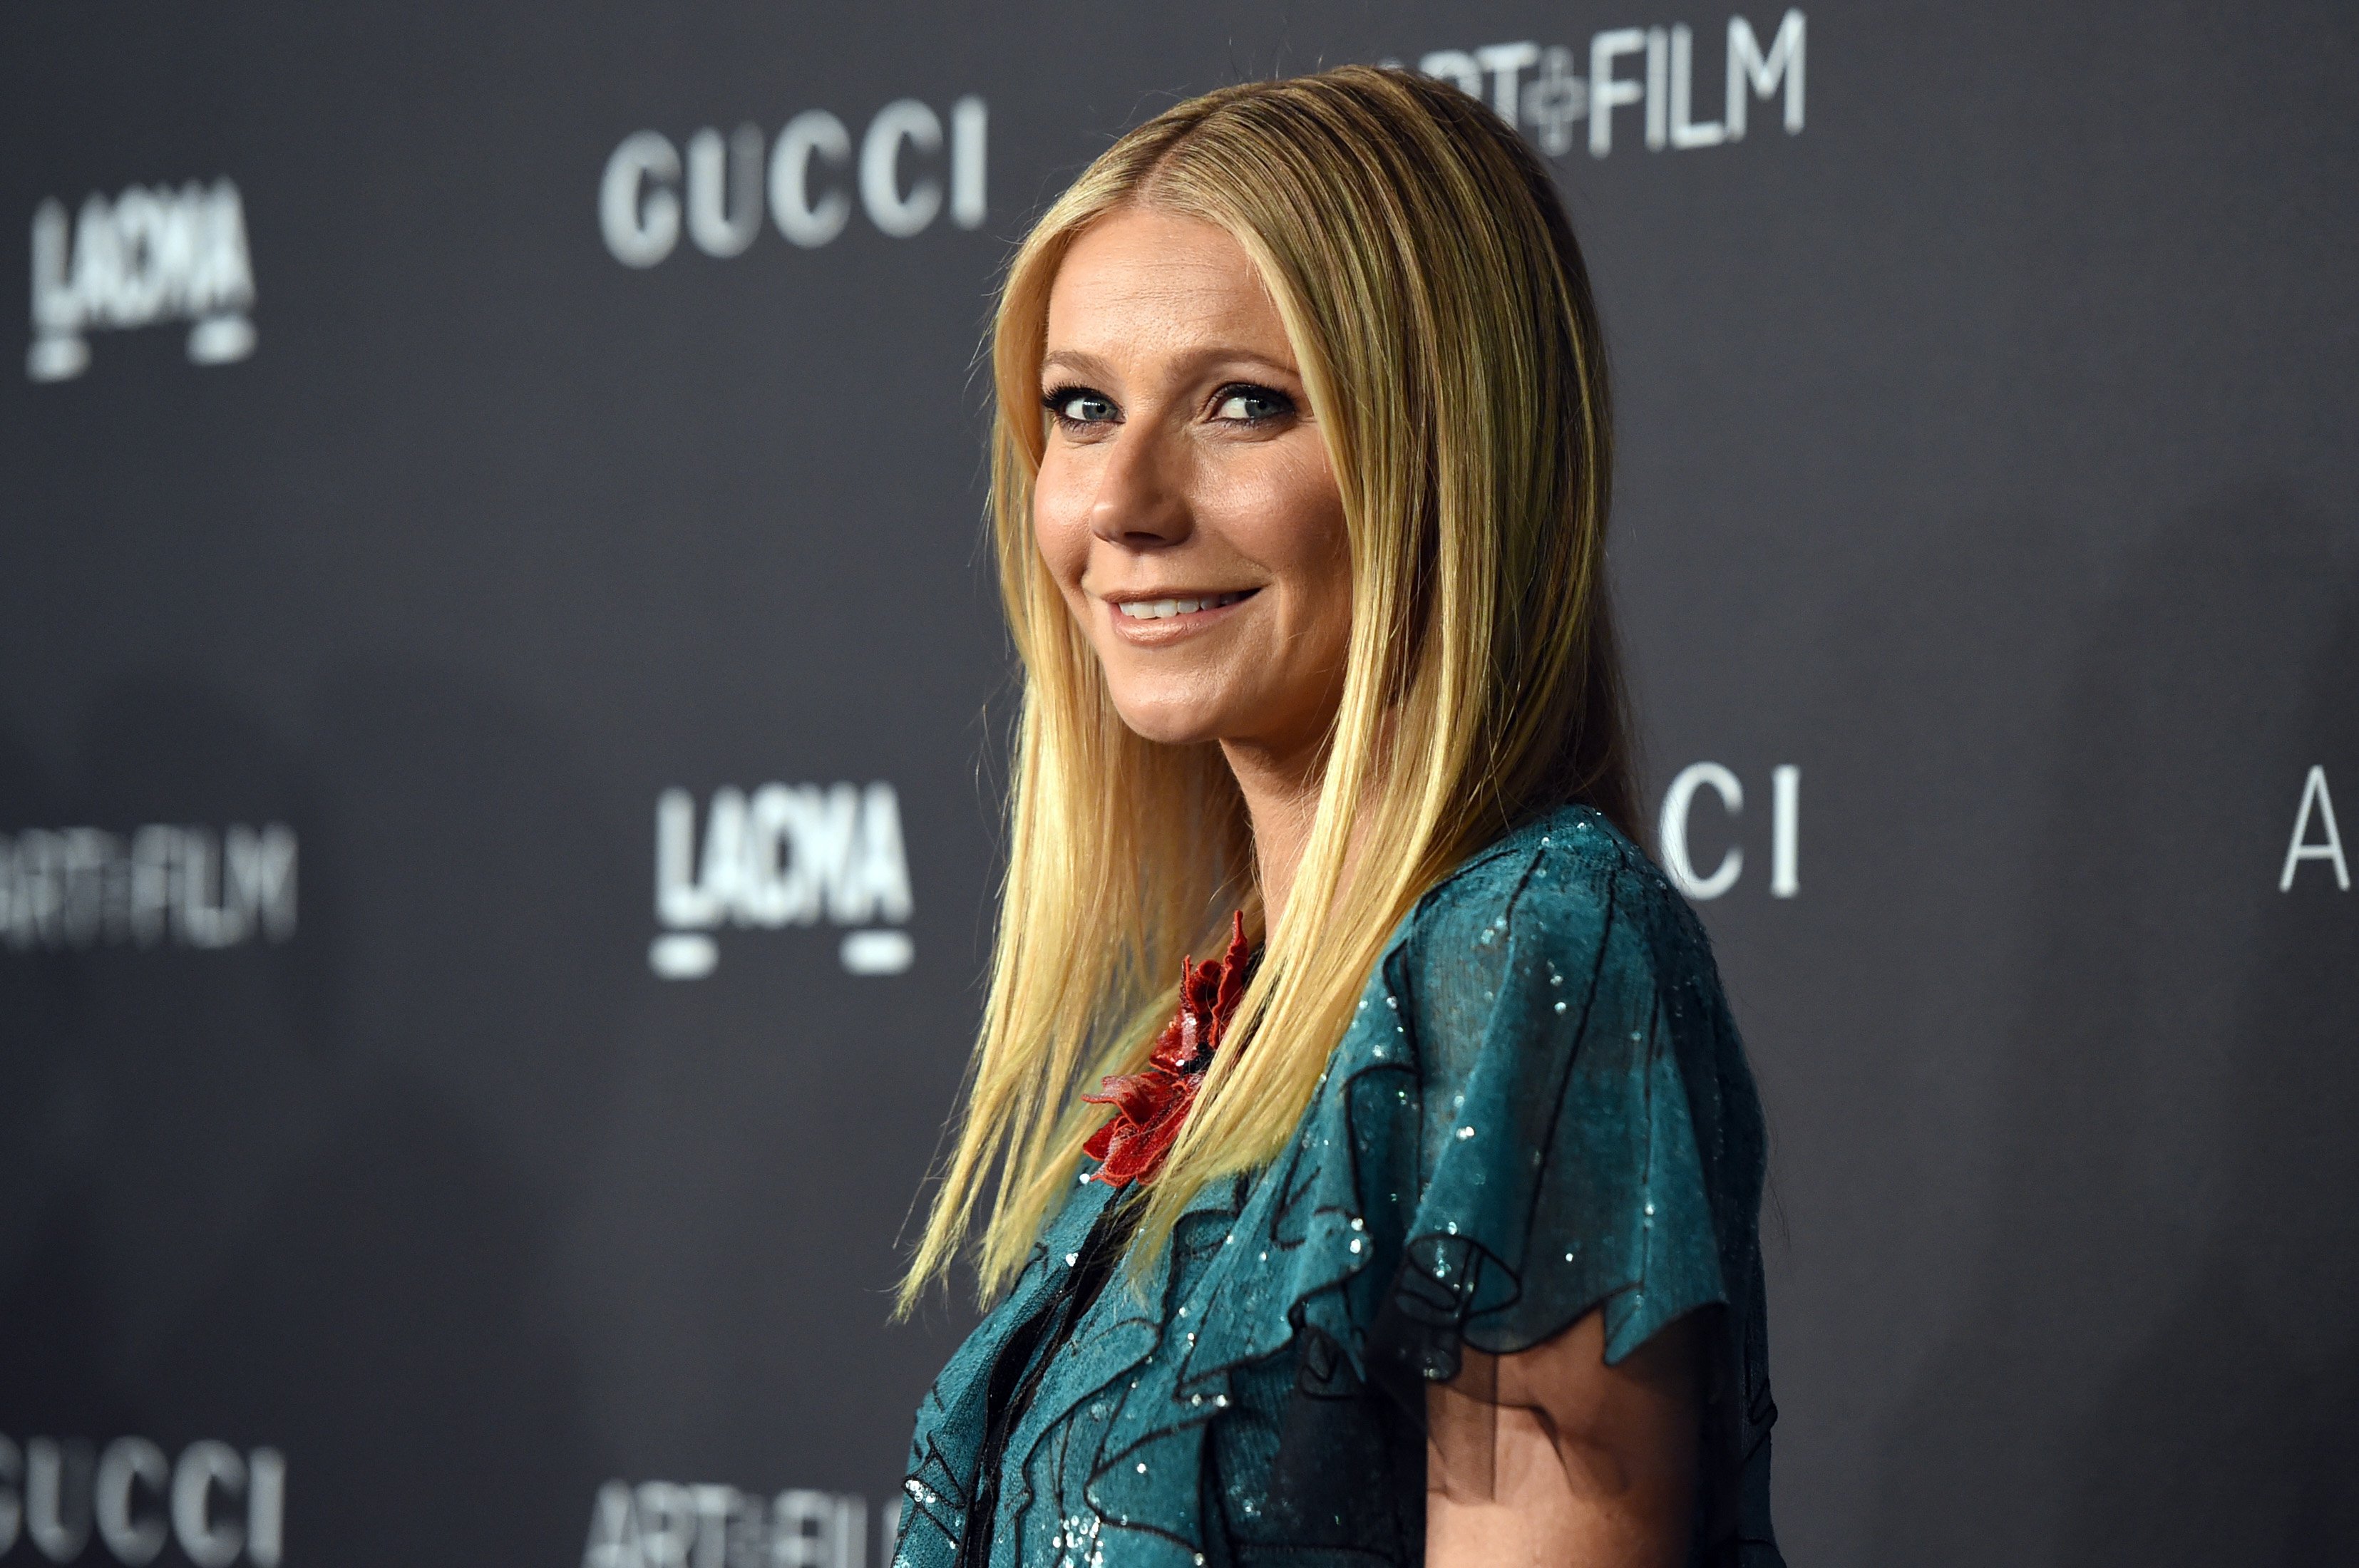 Actress Gwyneth Paltrow arrives at the LACMA 2015 Art+Film Gala Honoring James Turrell And Alejandro G Inarritu, Presented By Gucci at LACMA on November 7, 2015 in Los Angeles, California | Source: Getty Images